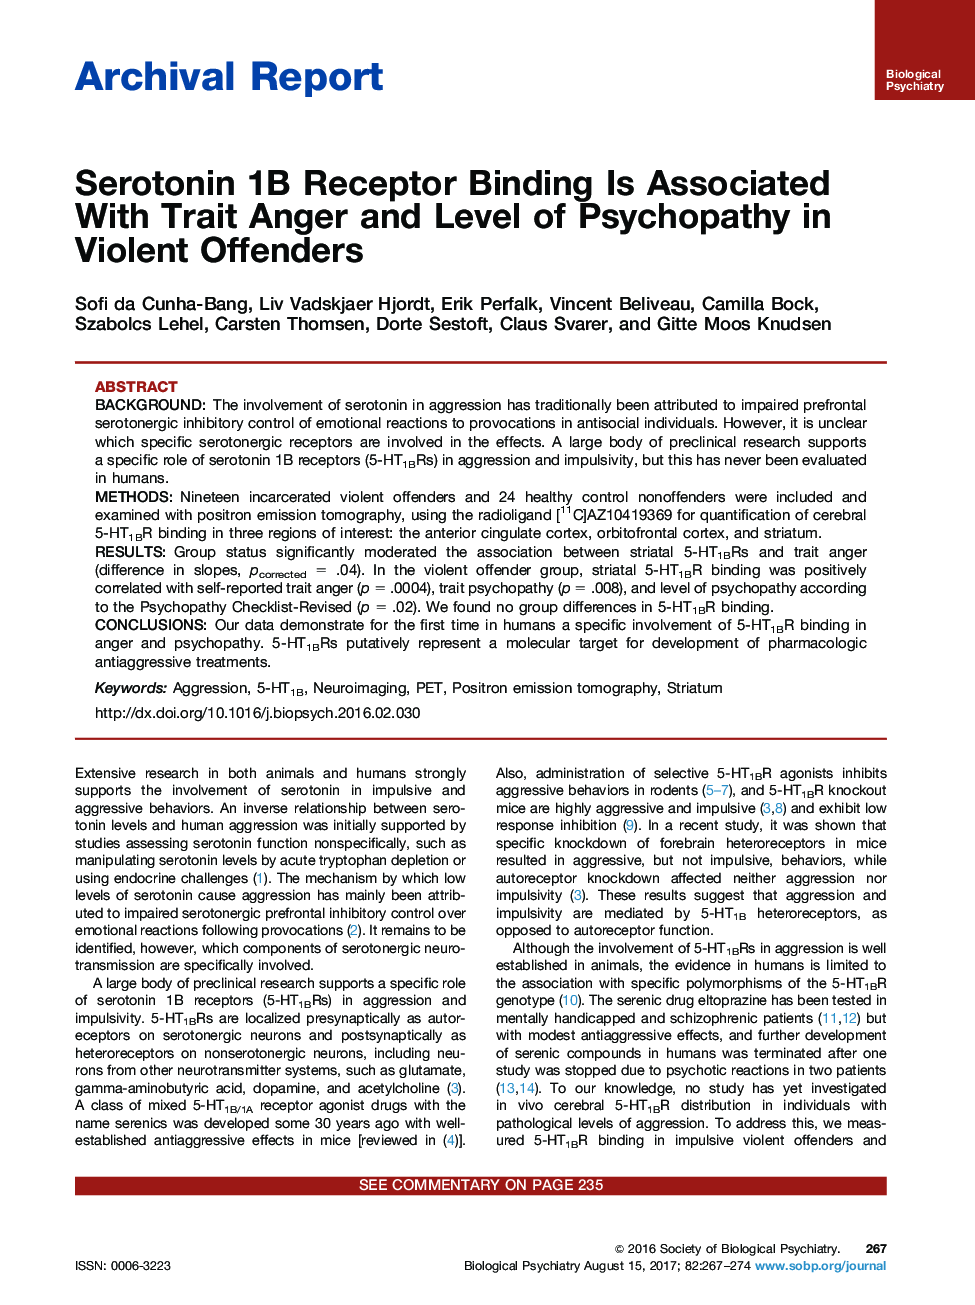 Archival ReportSerotonin 1B Receptor Binding Is Associated With Trait Anger and Level of Psychopathy in Violent Offenders